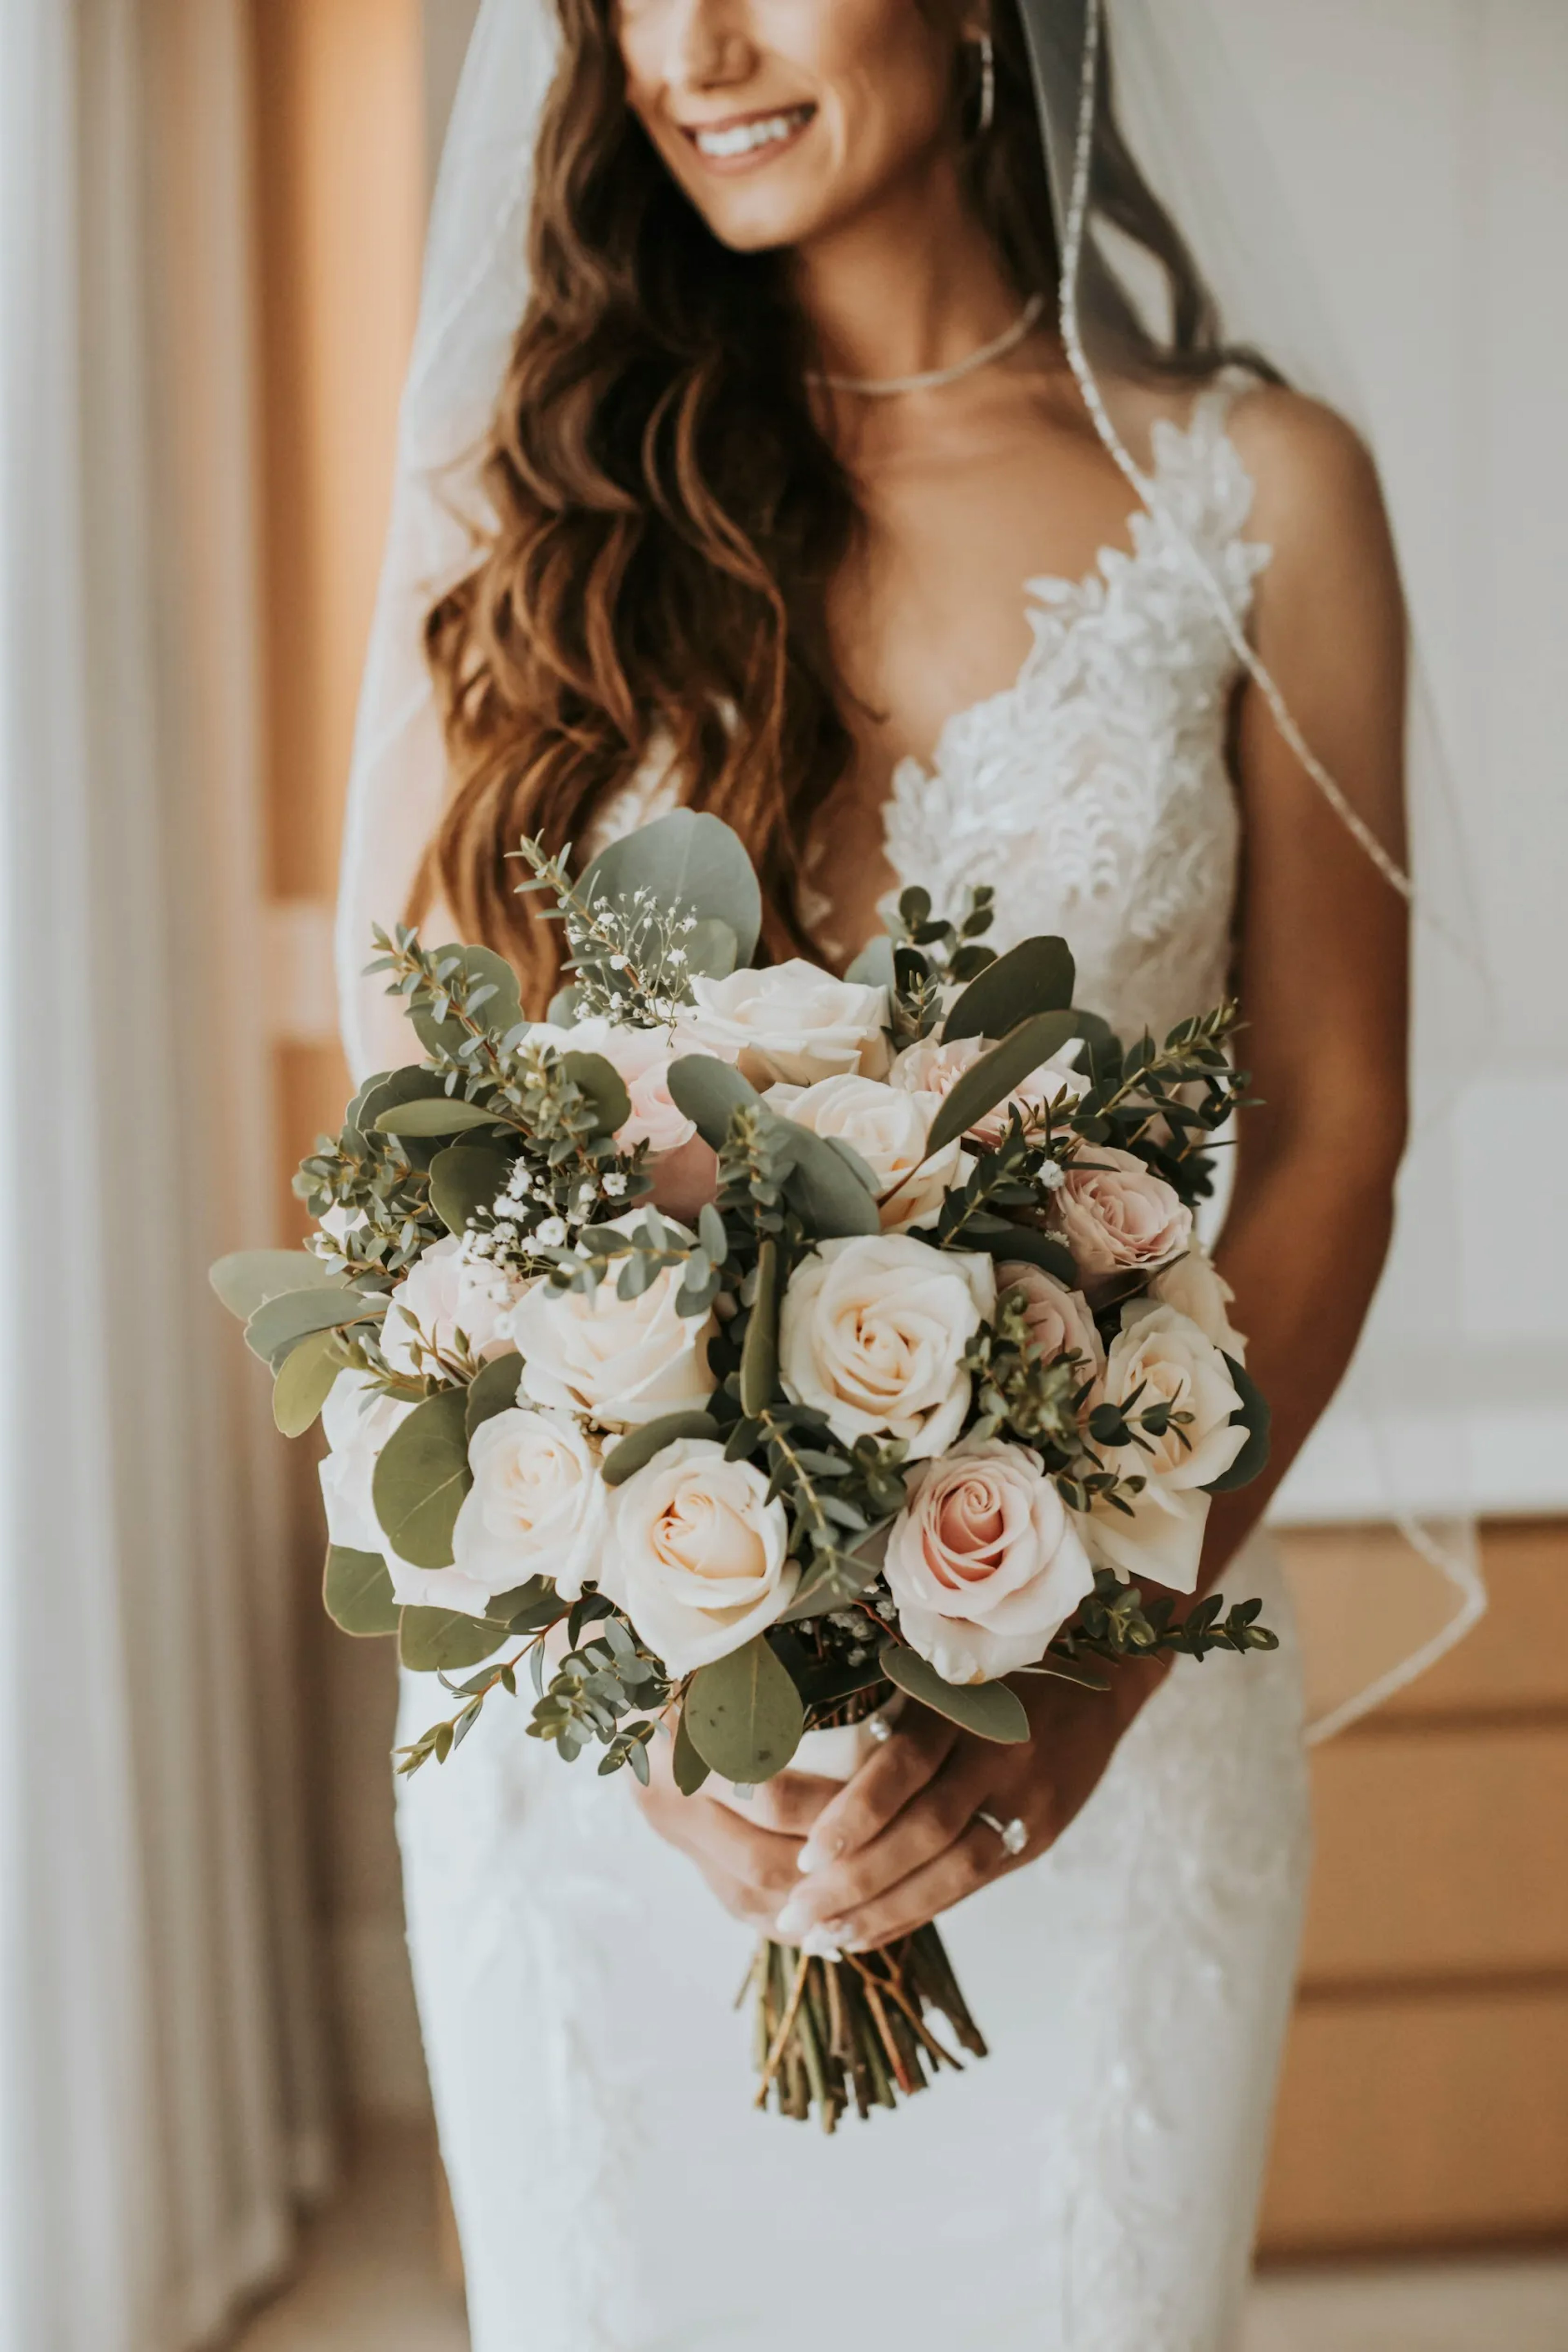 A joyful bride with a flowing veil and cascading hair holds a beautiful bouquet of pale roses and greenery, the warmth of her smile enhancing the romantic and elegant essence of the moment.